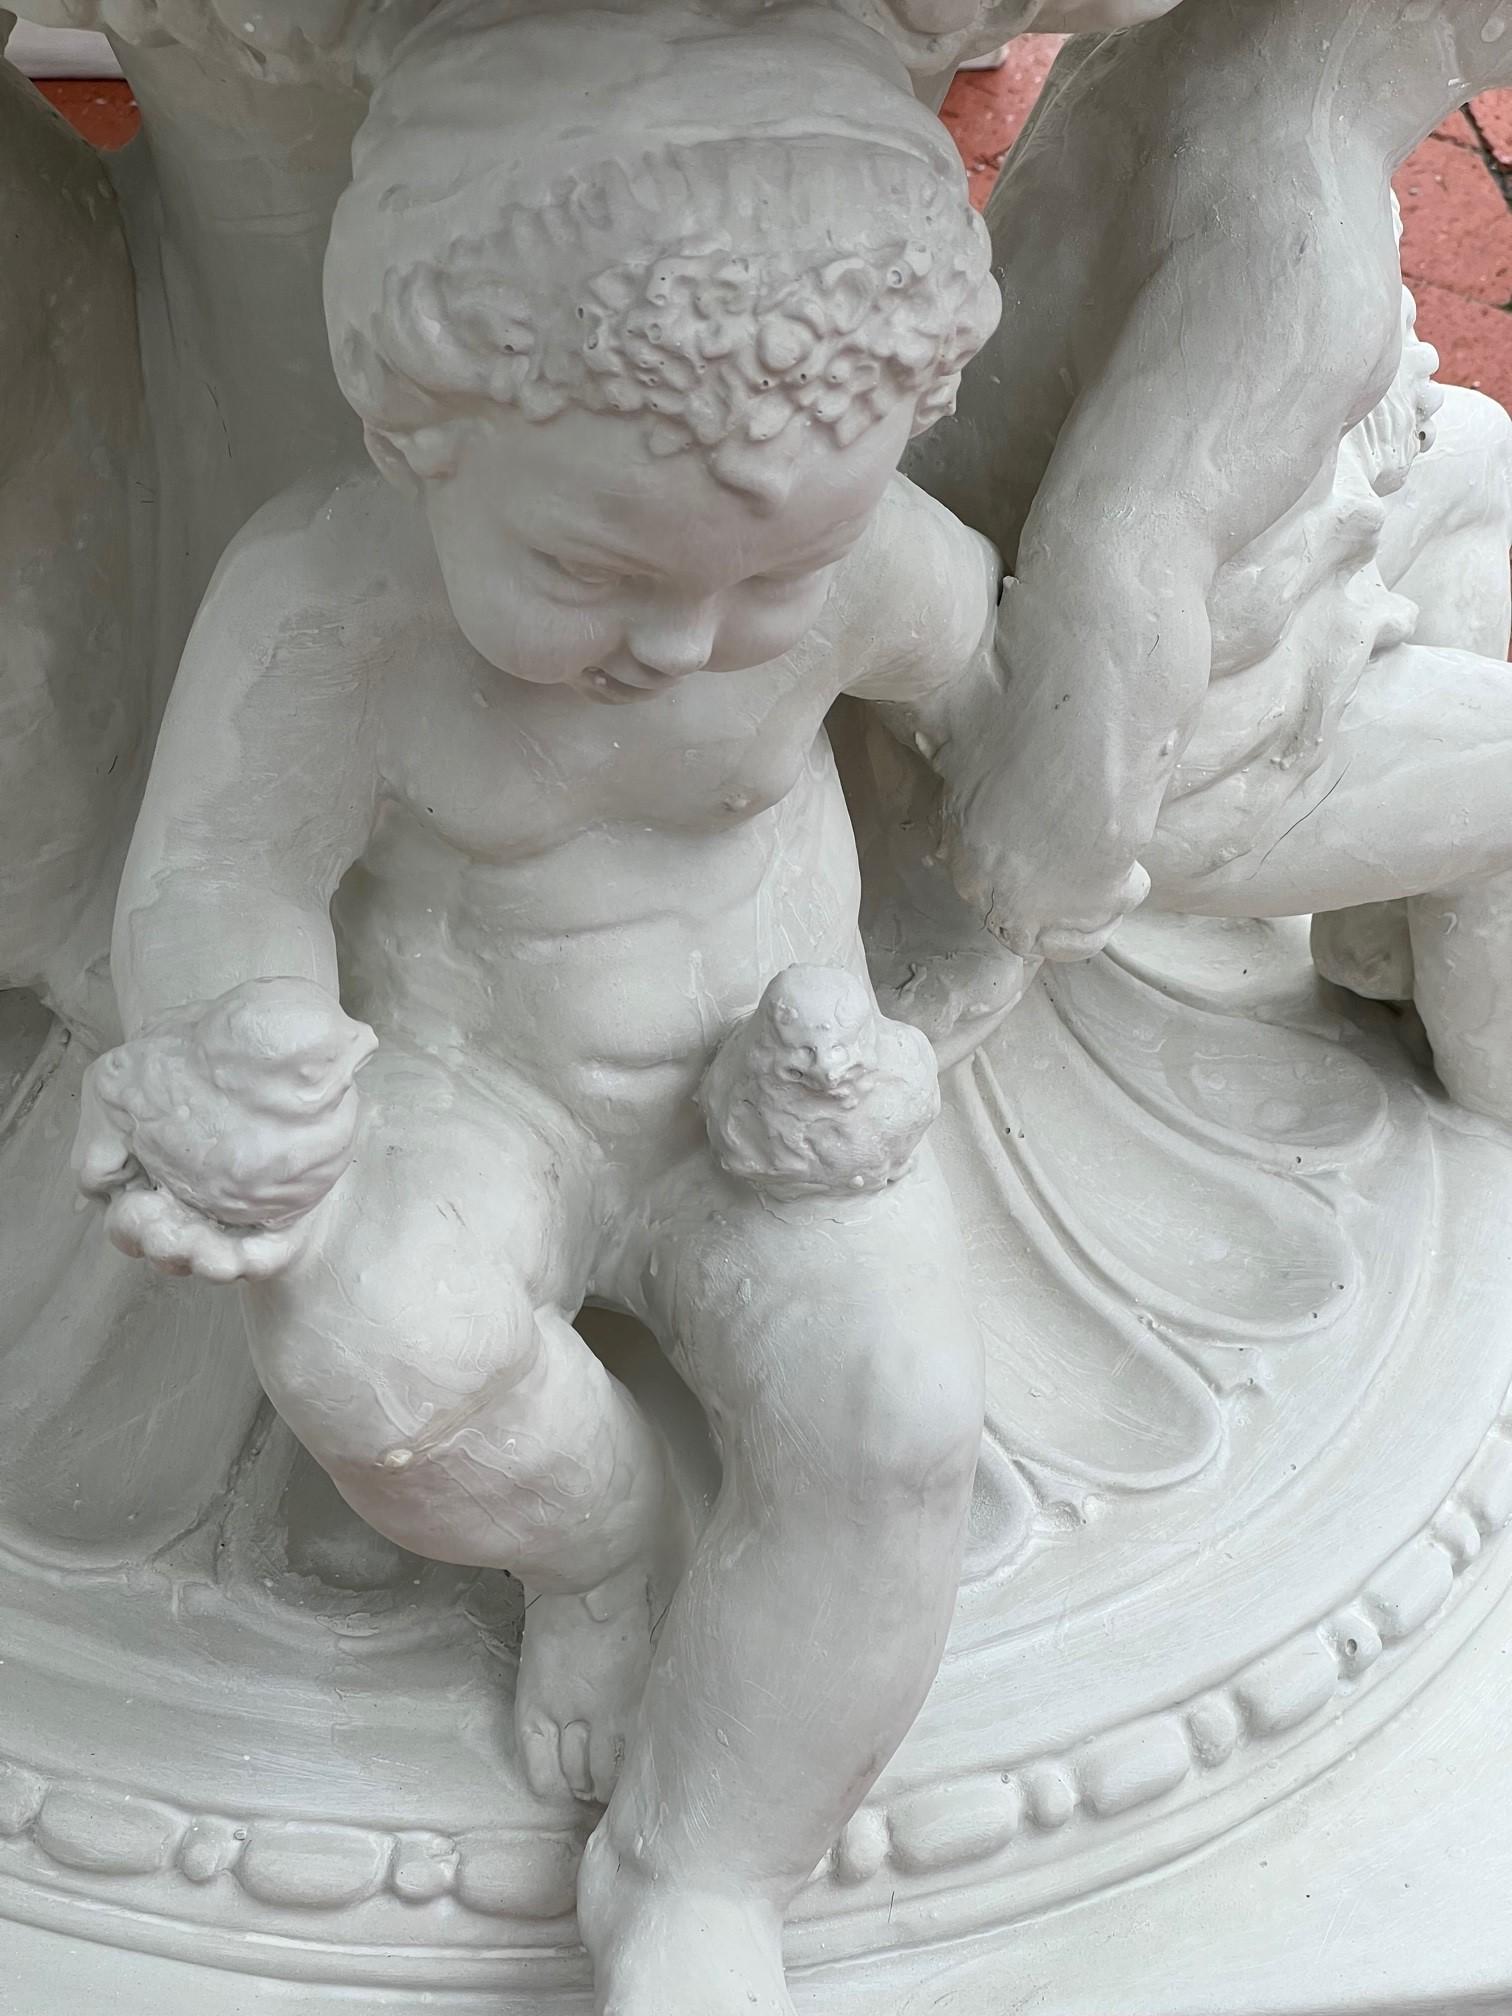 Molded Reproduction White Fiberglass Urn with Large Handles Grape Vines and Cherubs   For Sale